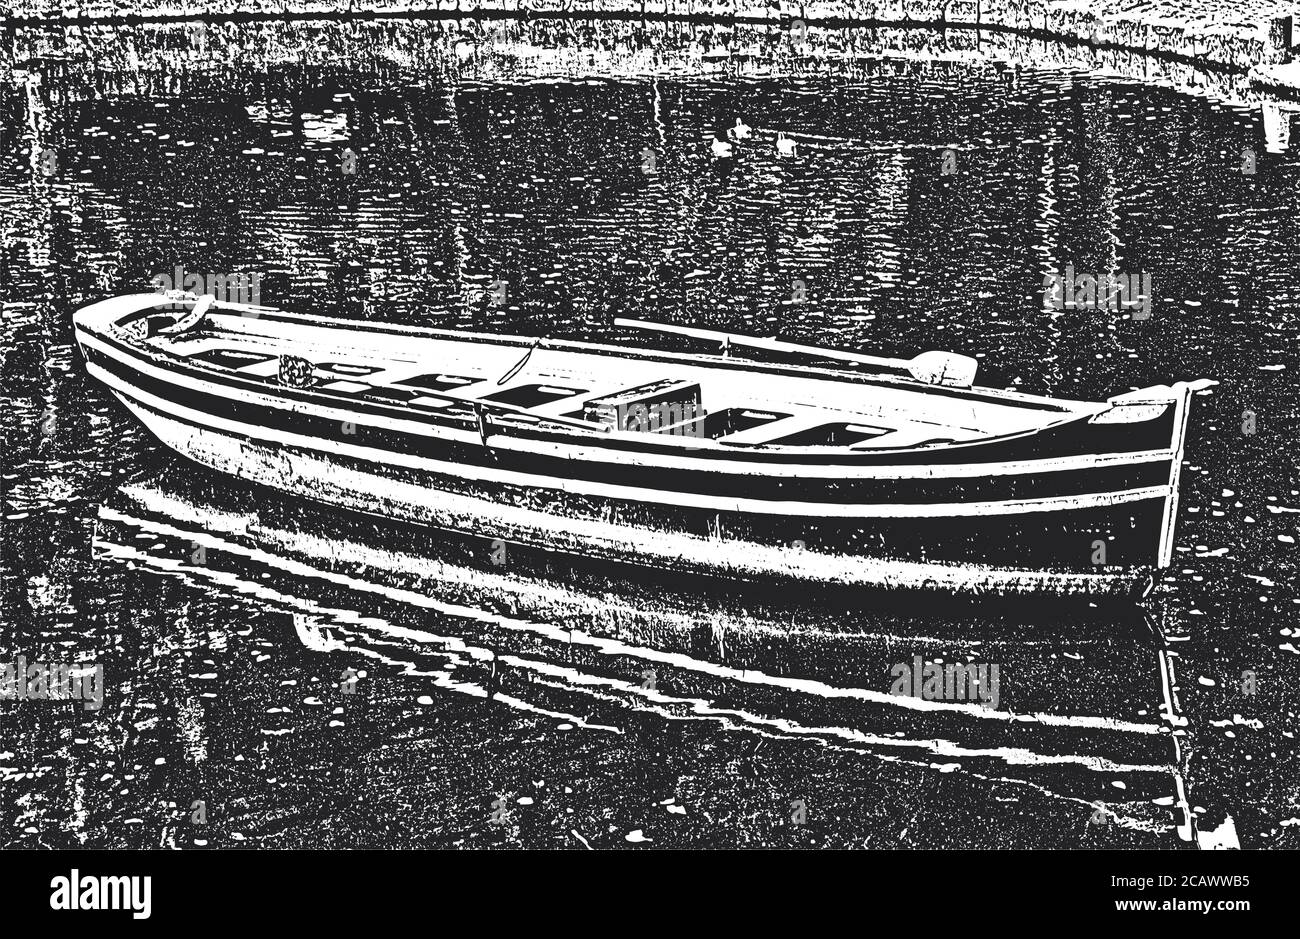 Old worn wooden boats on the river bank. Distressed vector Illustration. Black and white background. Stock Vector